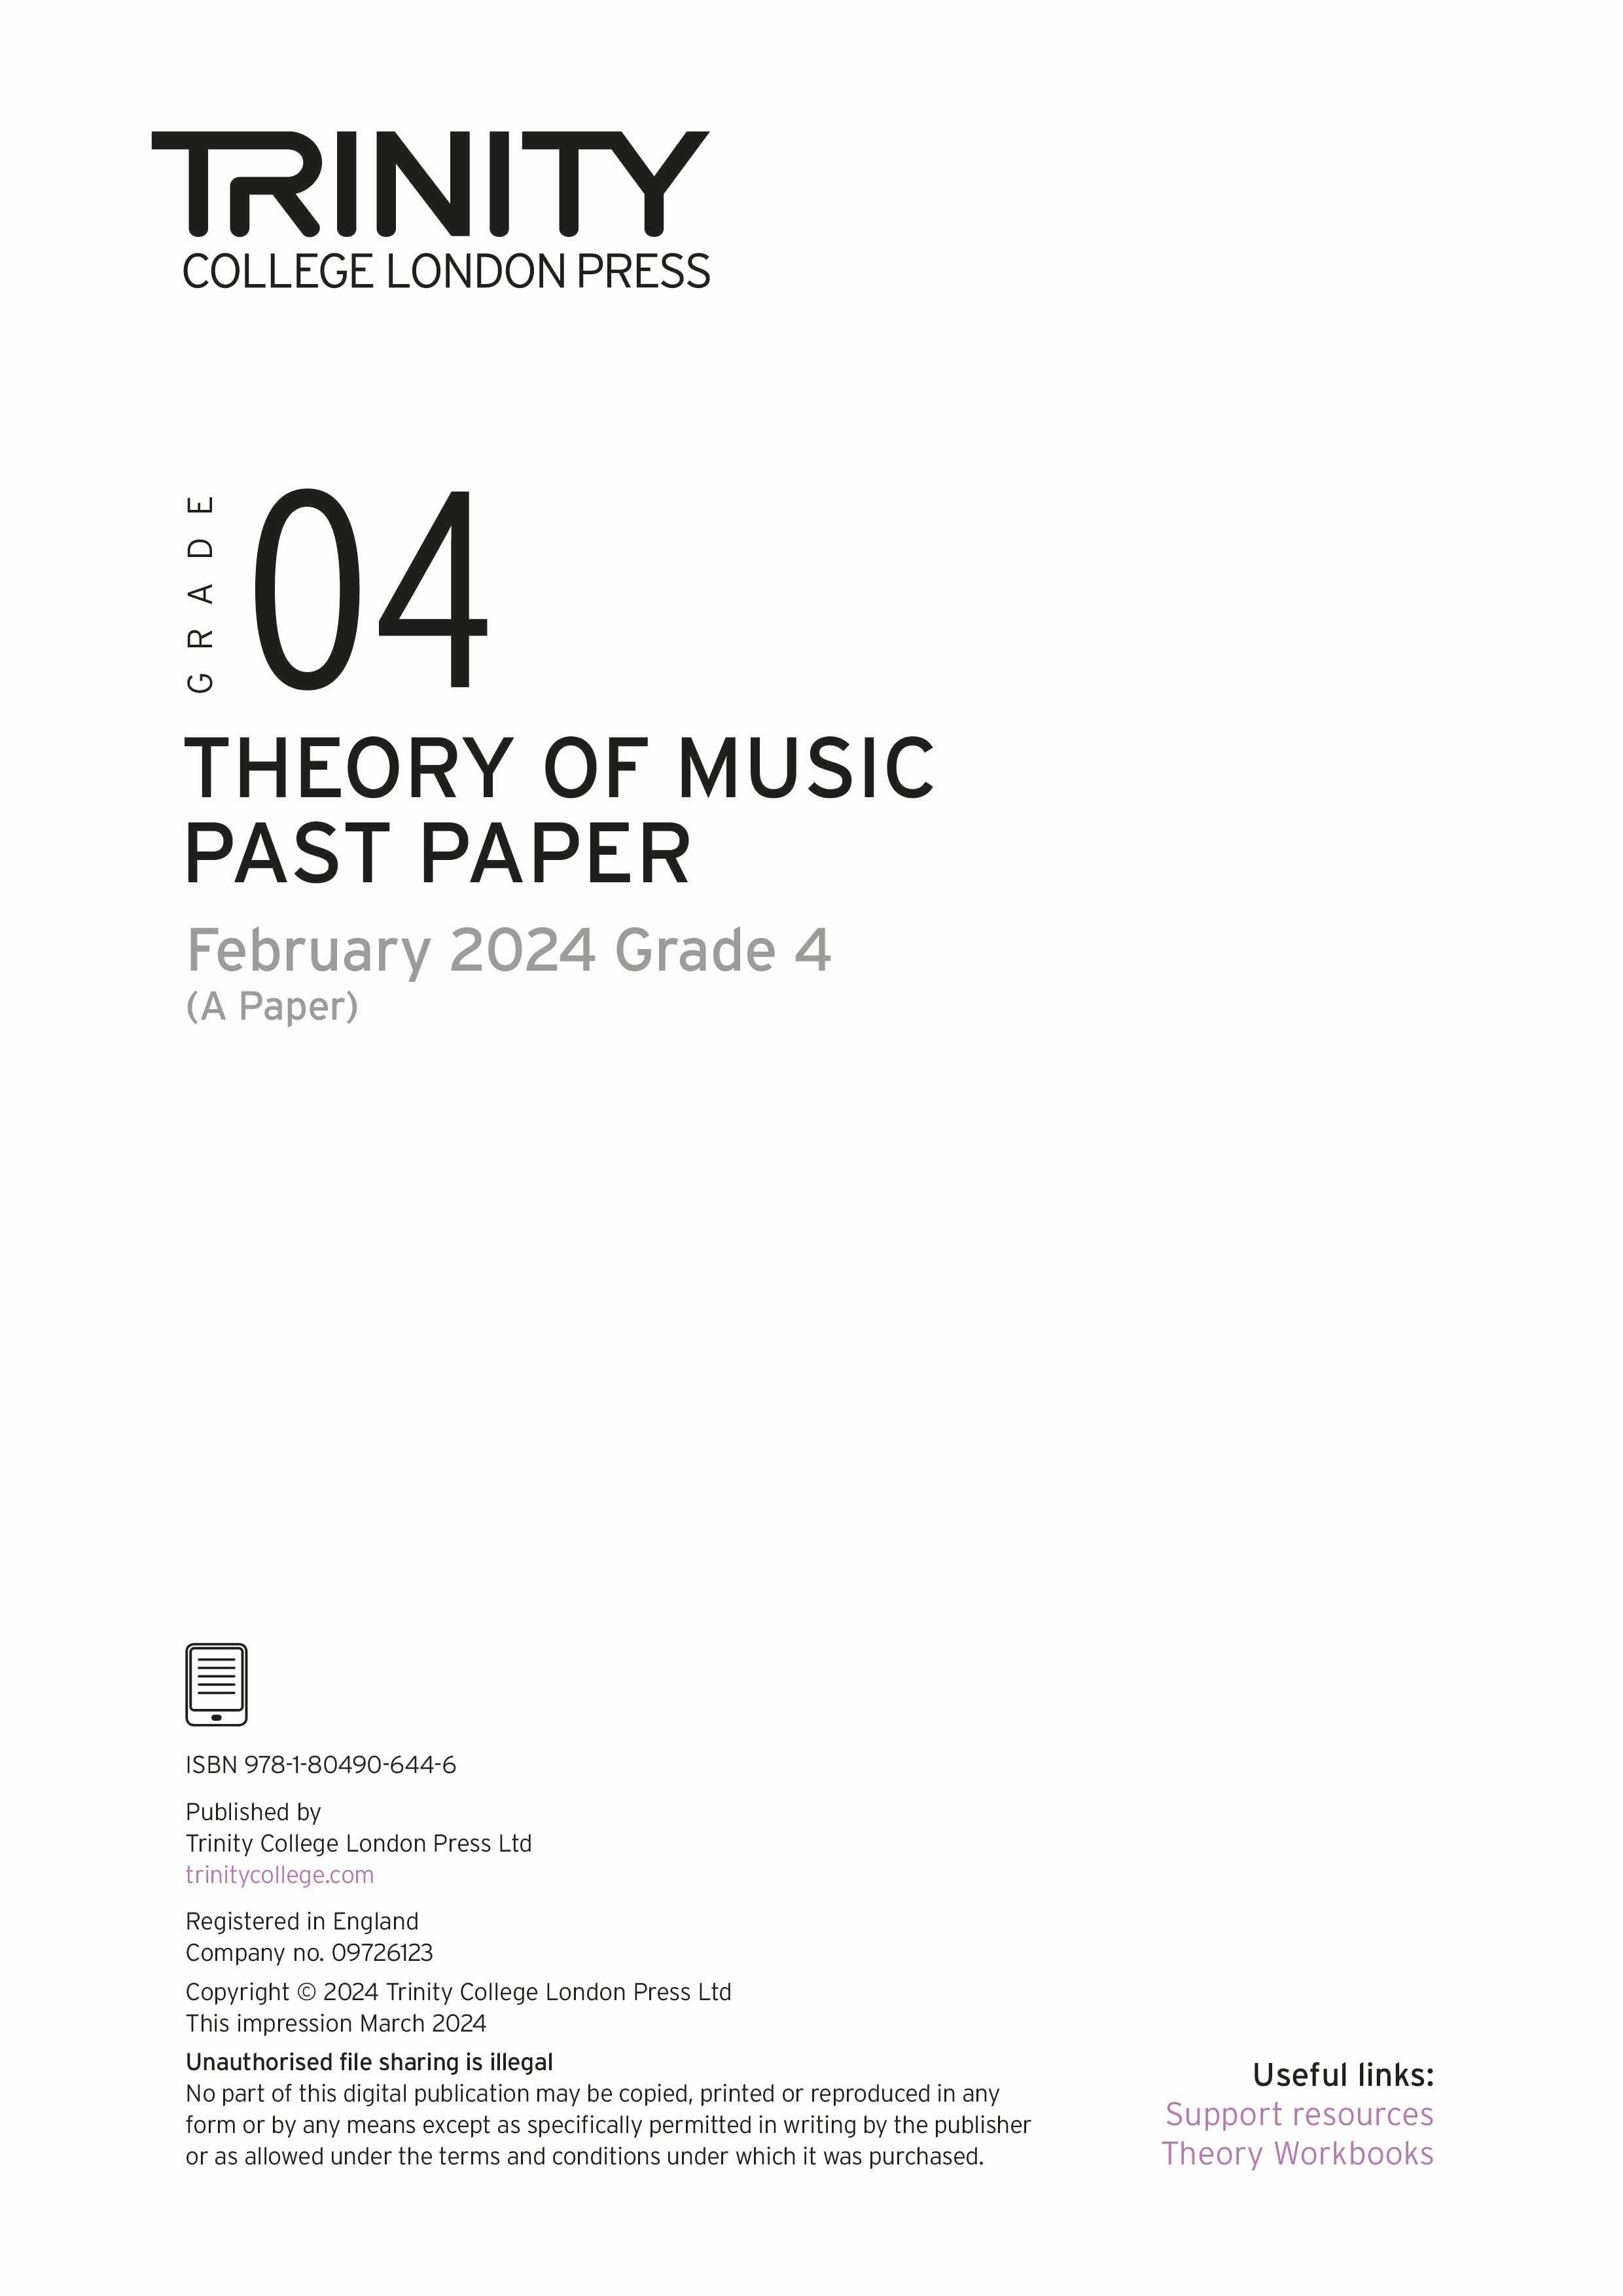 Theory of Music Past Paper 2024 February A: Grade 4 - ebook